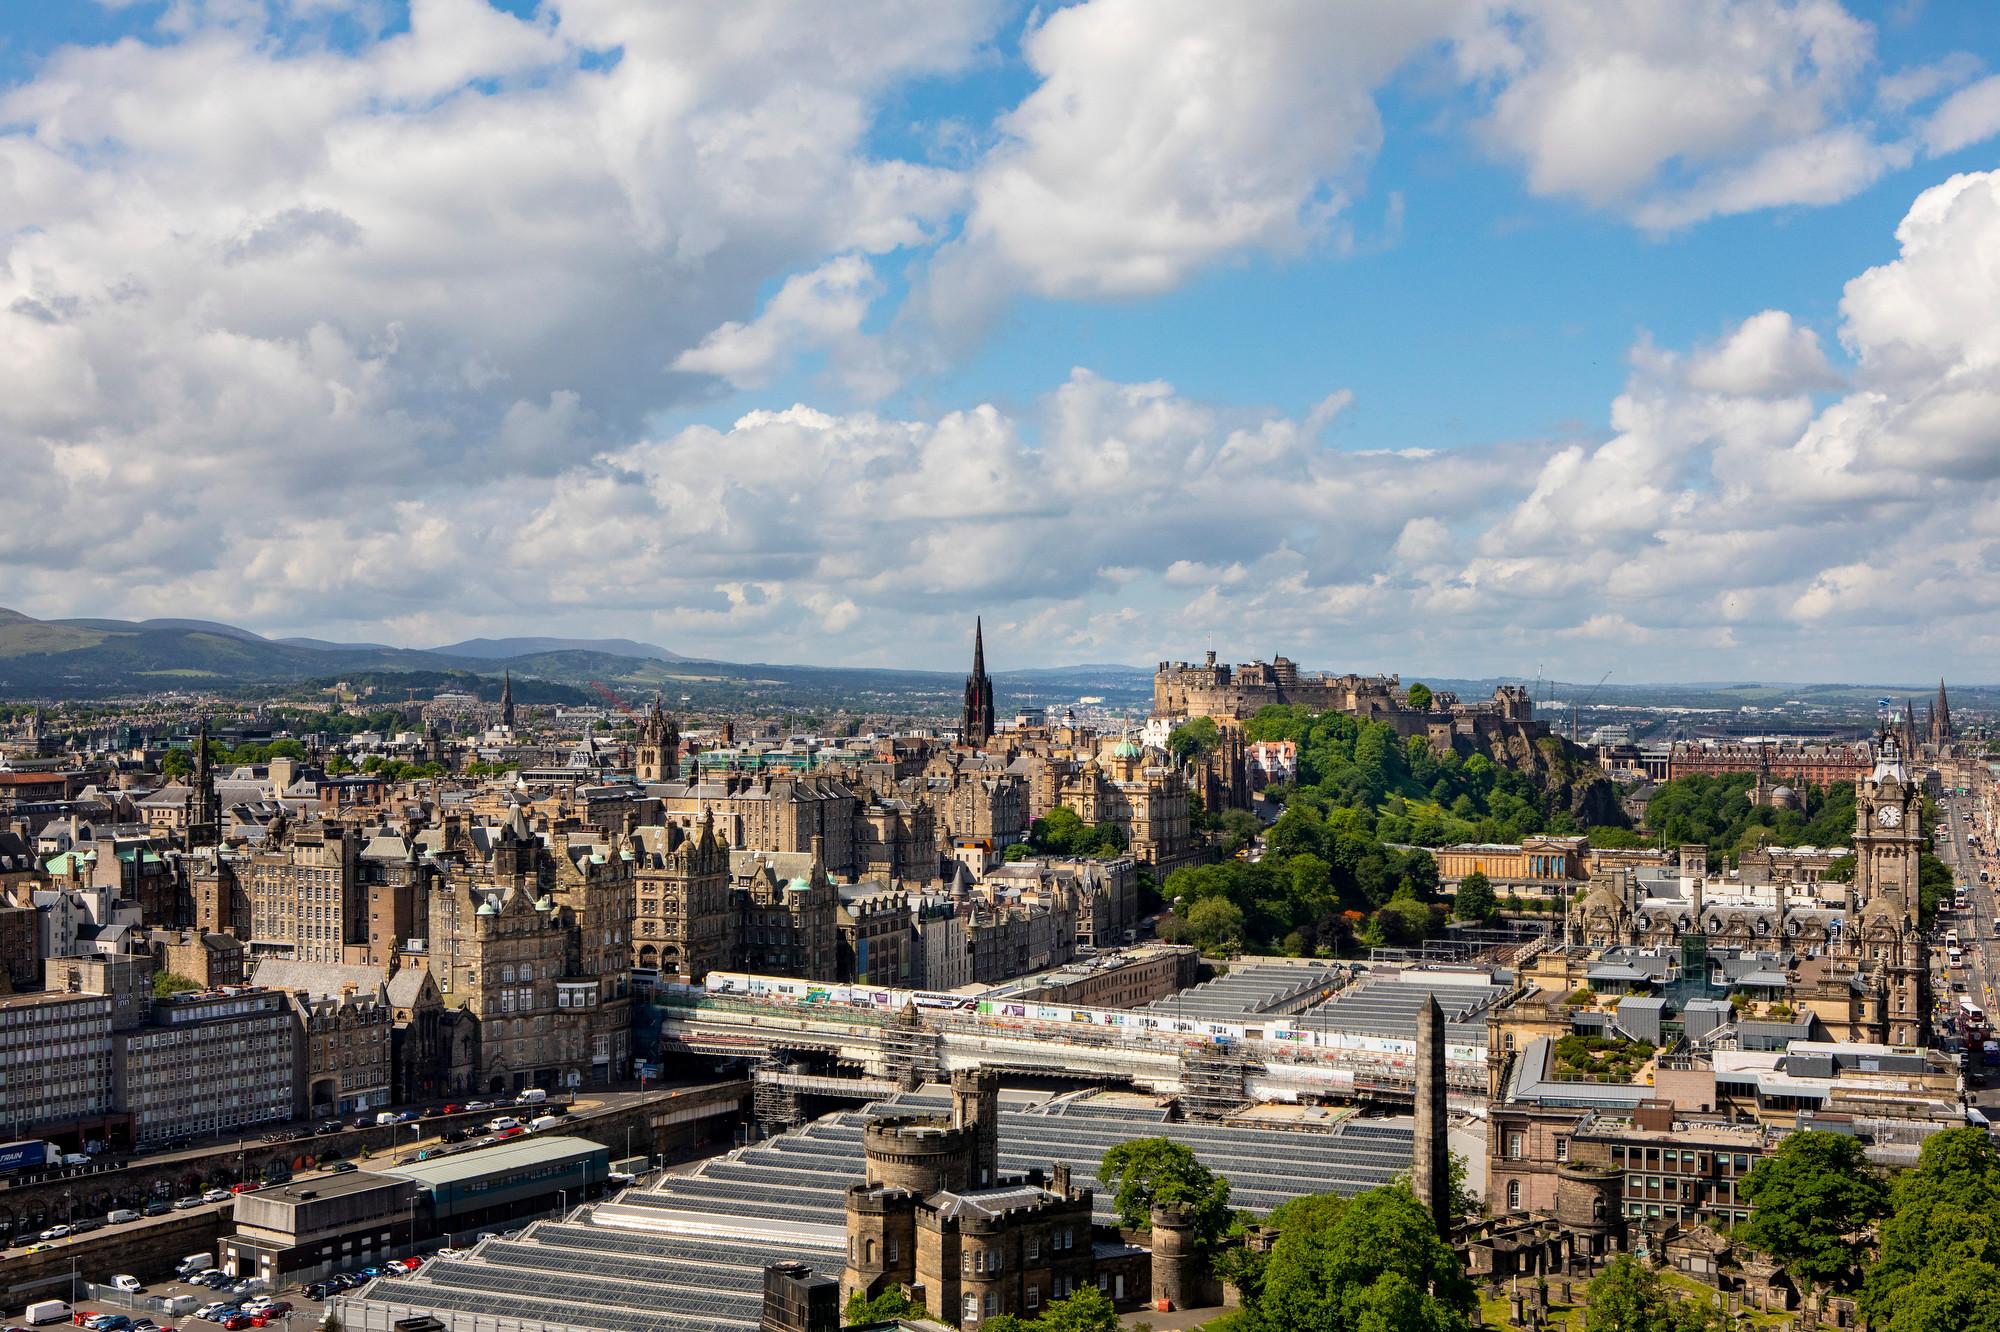 Skyline of Edinburgh from Calton Hill, it is a sunny day with some clouds. The Castle, Waverley Train Station and the Old Town are pictured.